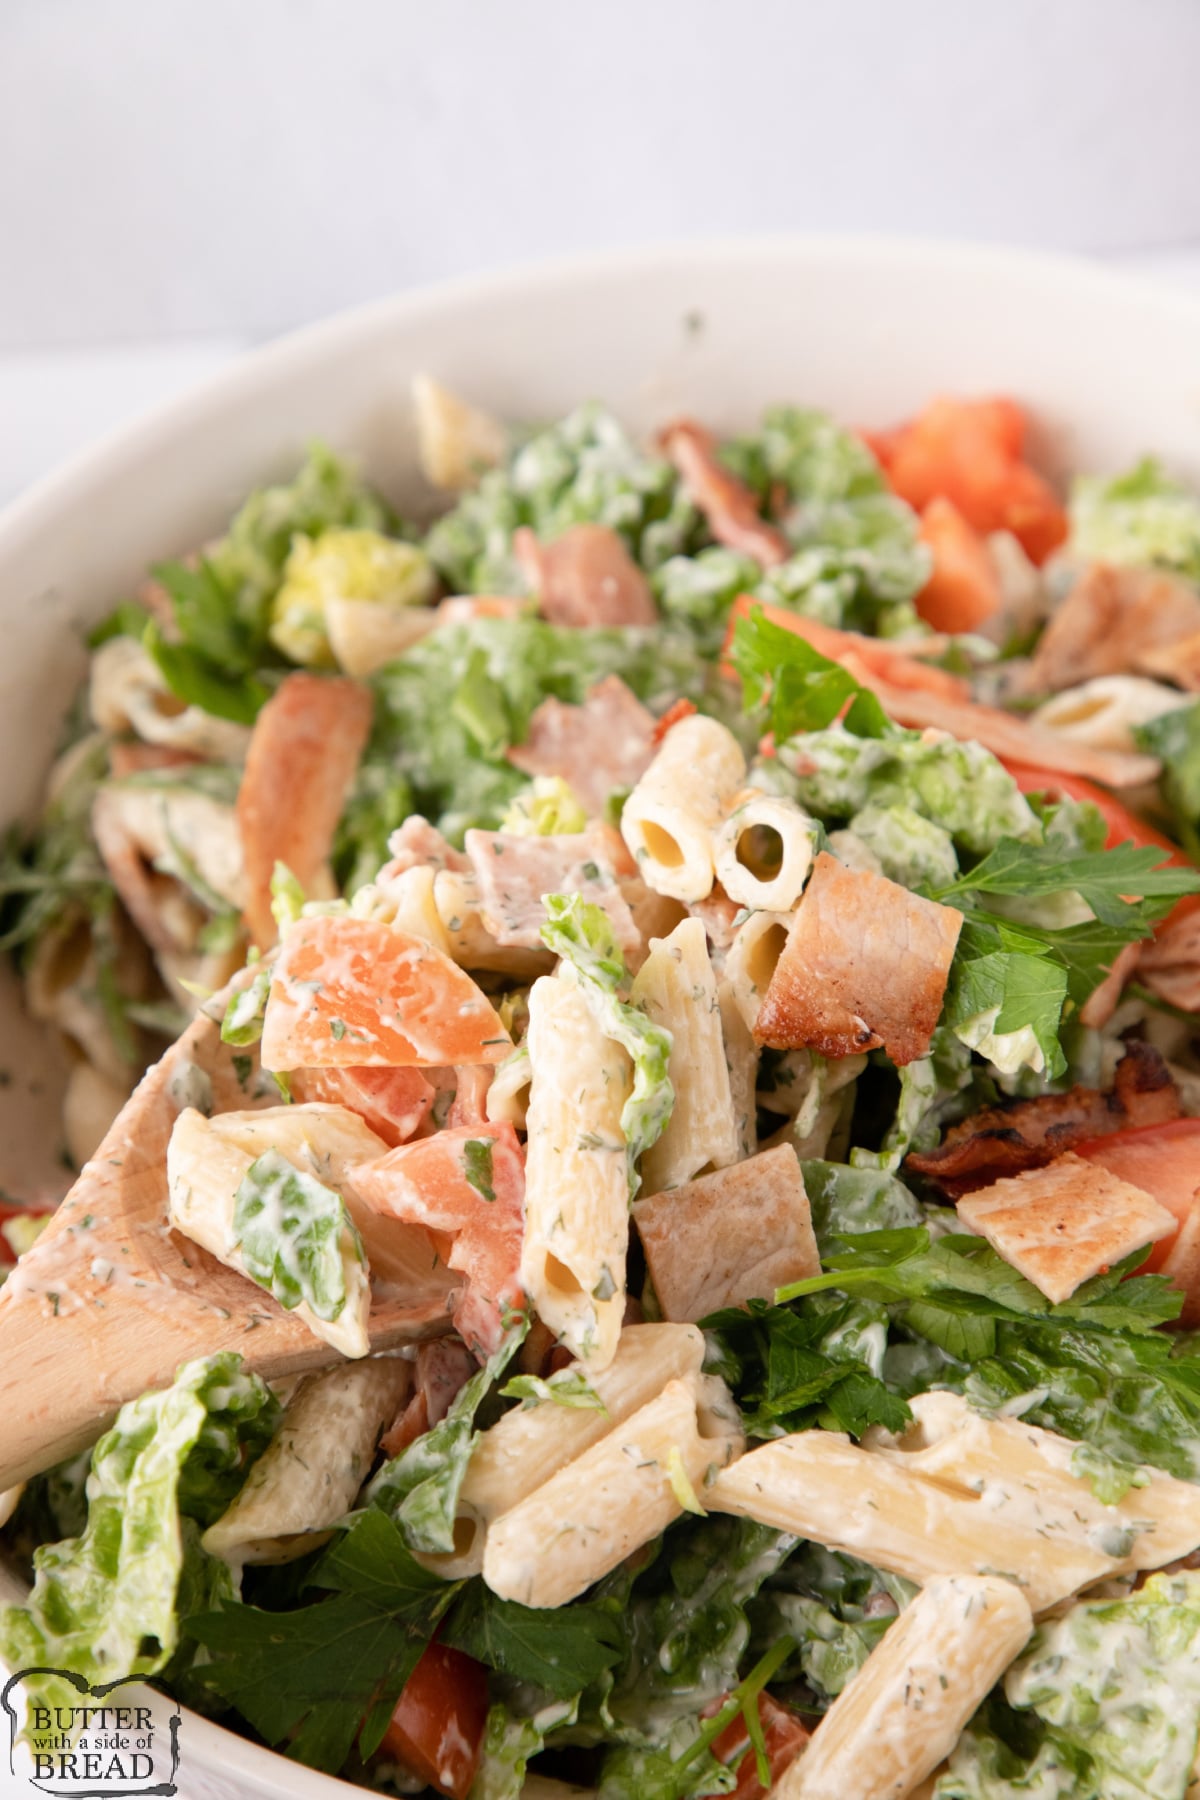 Pasta salad recipe with homemade ranch, lettuce, bacon and tomatoes